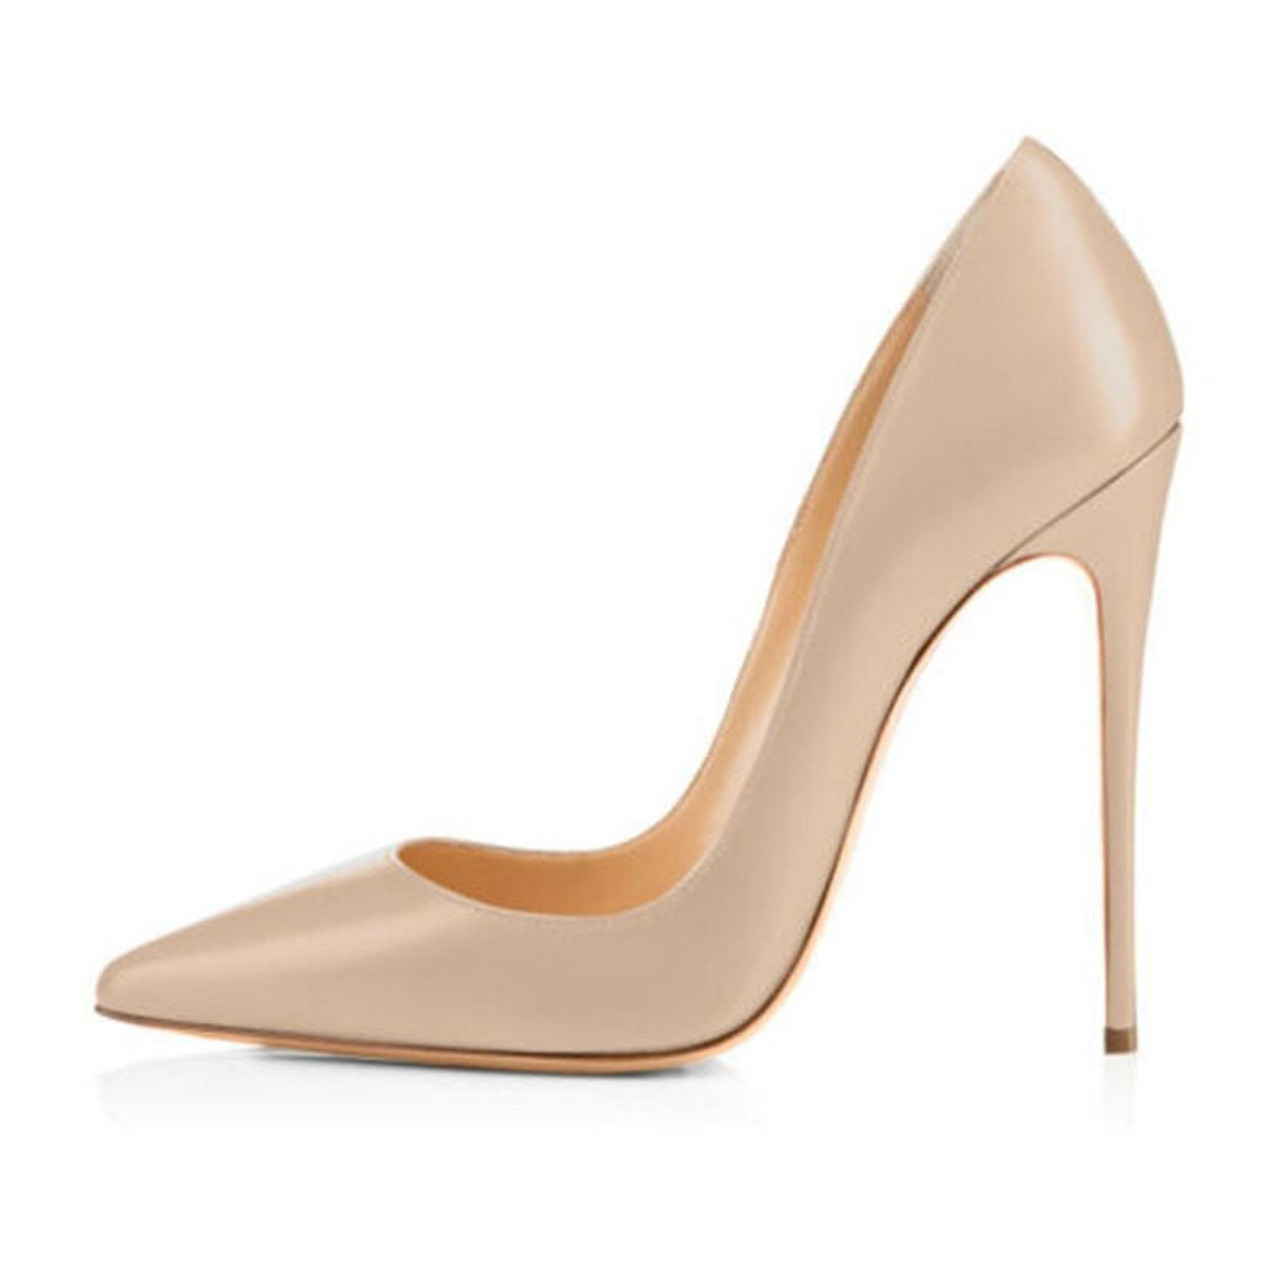 Patent Leather Thin High Heel Pumps Beige 37 Factory Direct